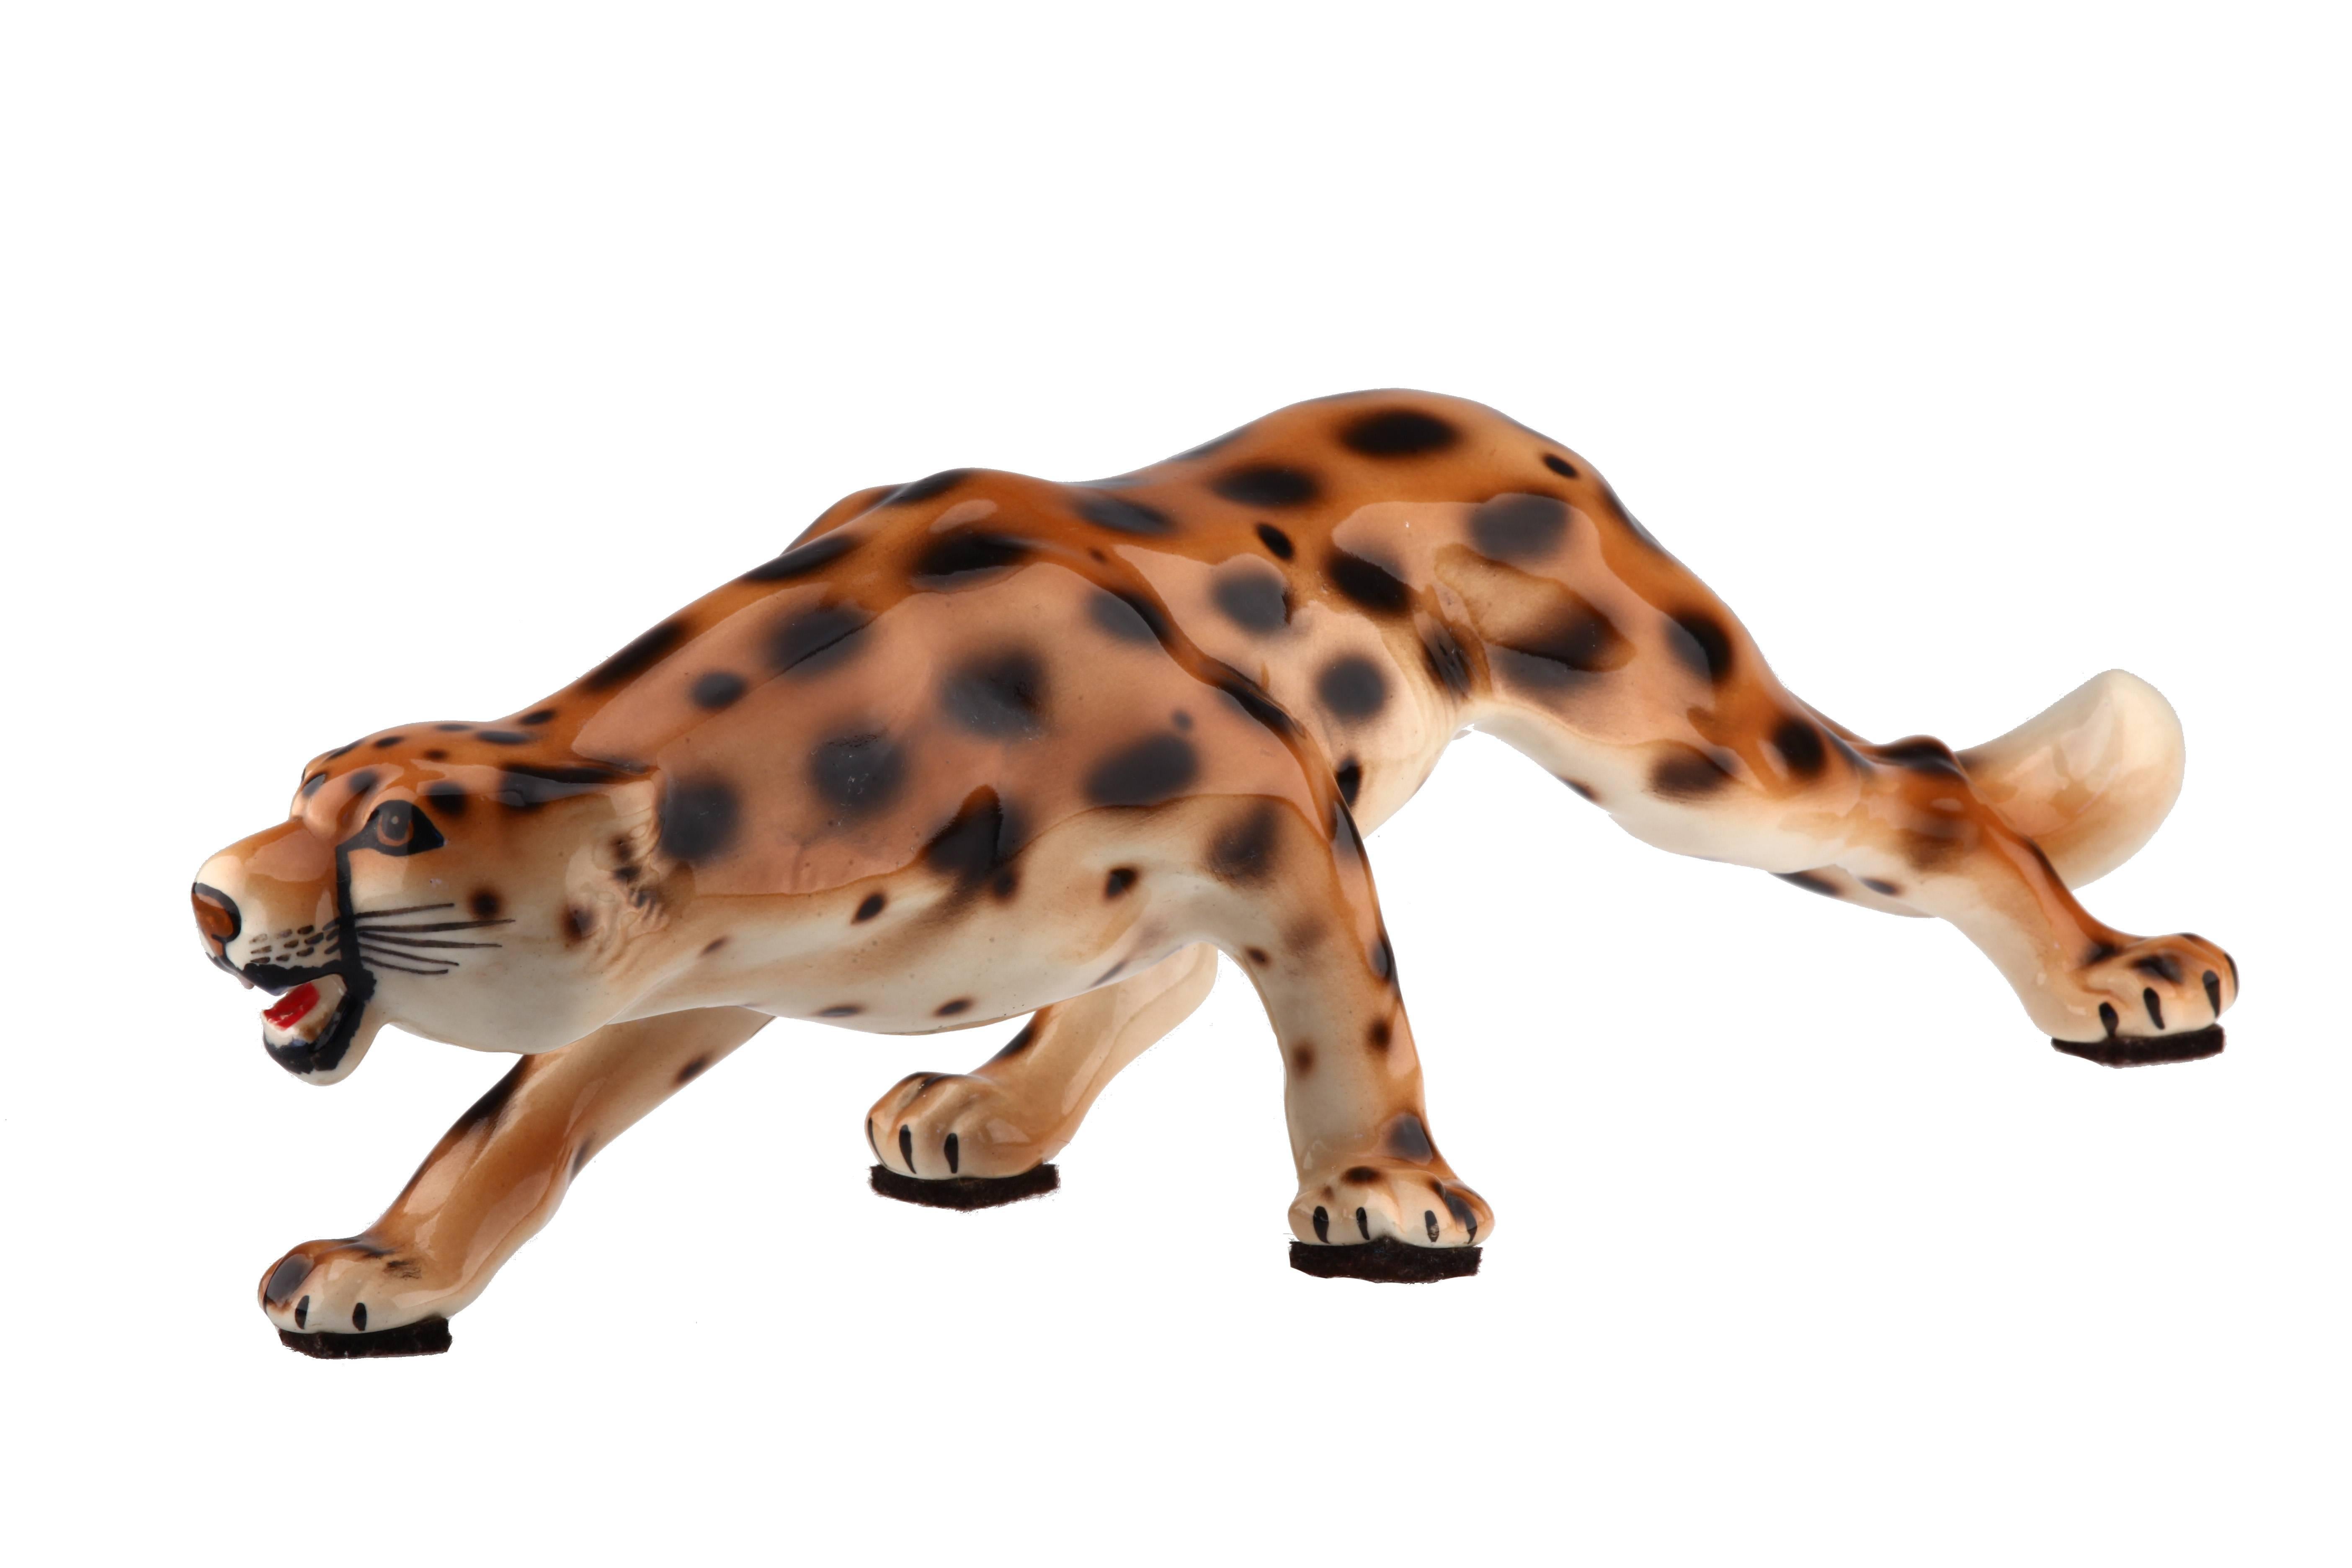 Italian Cheetah stalking big cat sculpture. Glossy ceramic hand-painted Mid-Century home deco panther. Hollywood Regency style.

Measures: Height 15 cm / 5.9 inch
Depth 15 cm / 5.9 inch
Length 45 cm / 17.7 inch

Is in a good, undamaged